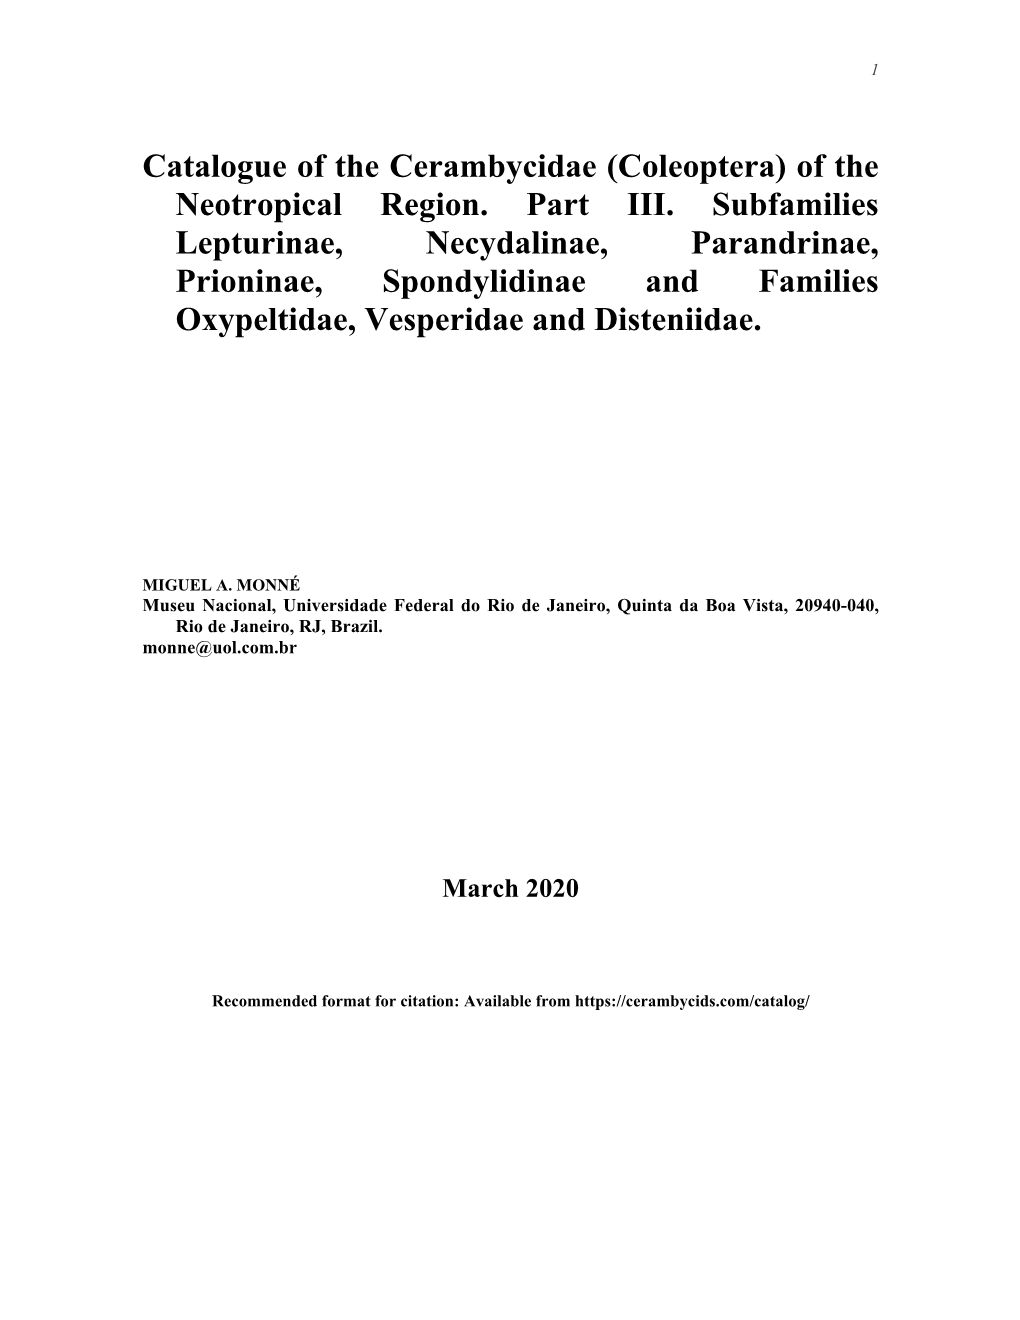 Catalogue of the Cerambycidae (Coleoptera) of the Neotropical Region